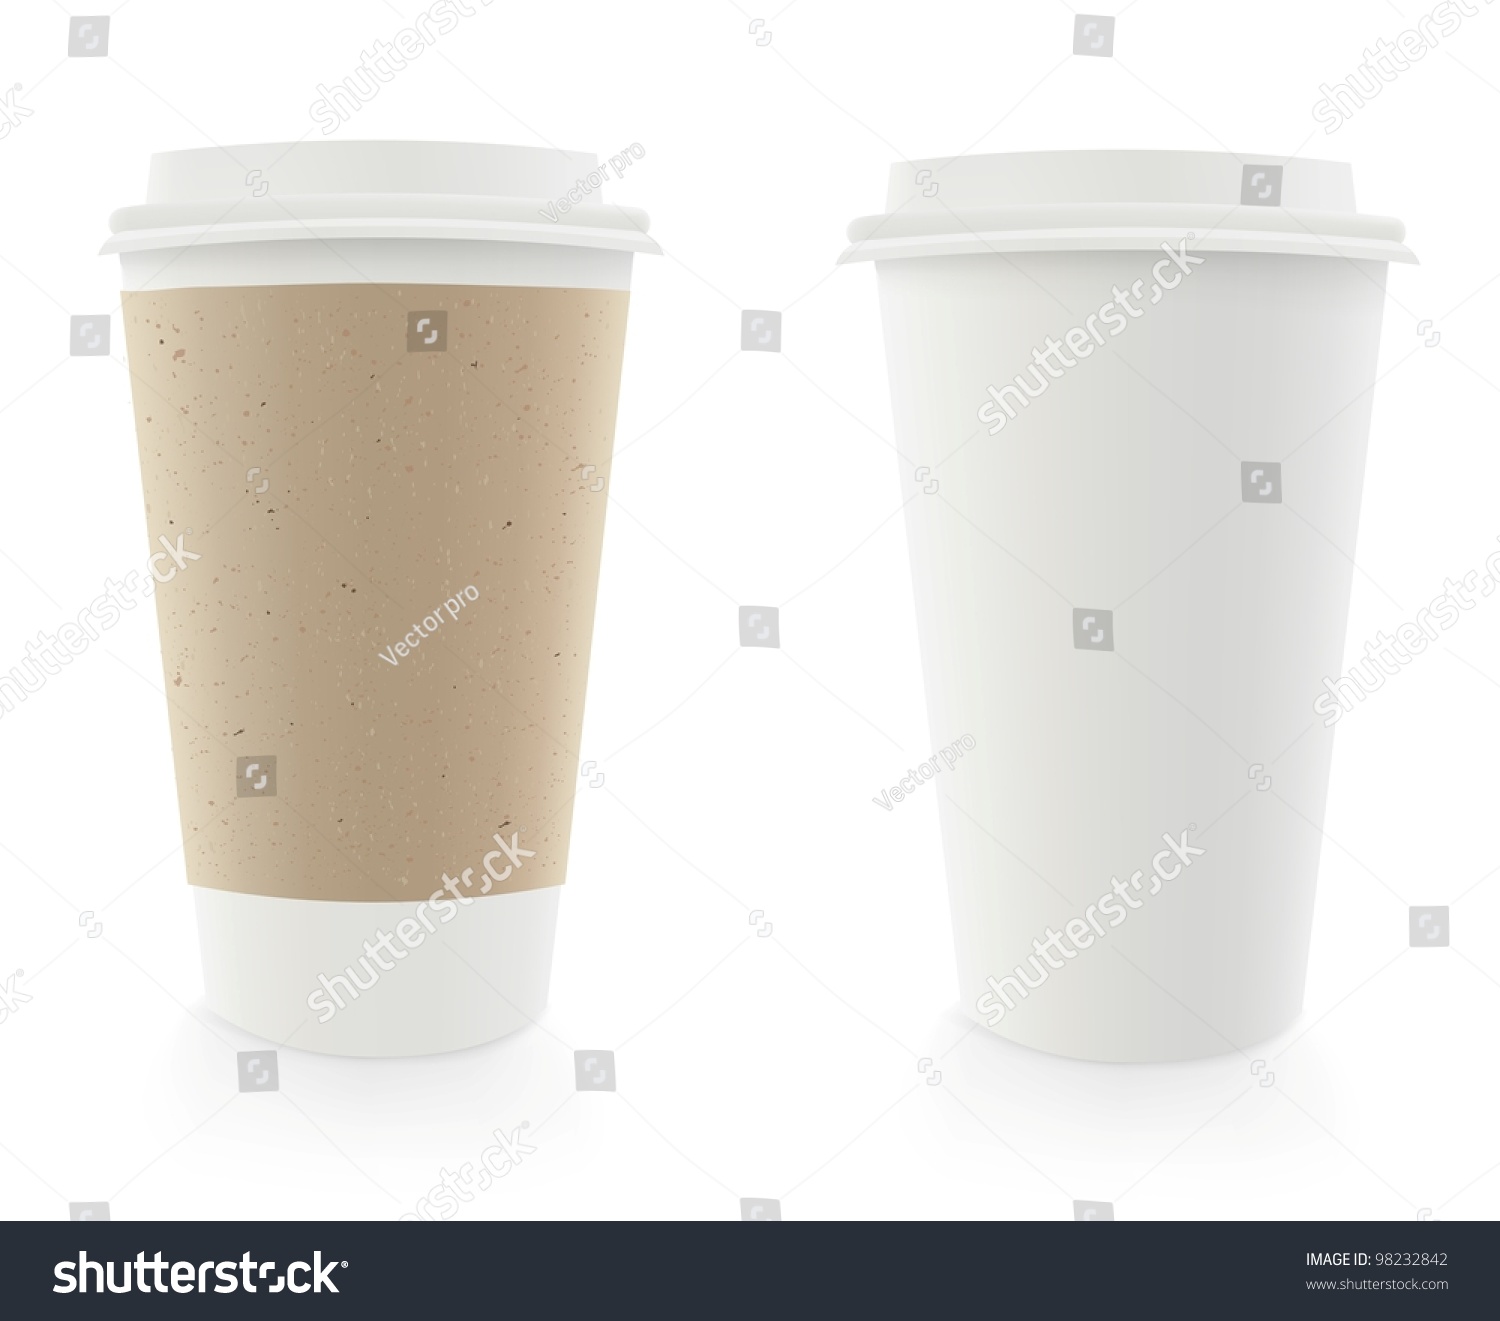 SVG of Vector dispossable coffee cup illustration (with cardboard cover) svg